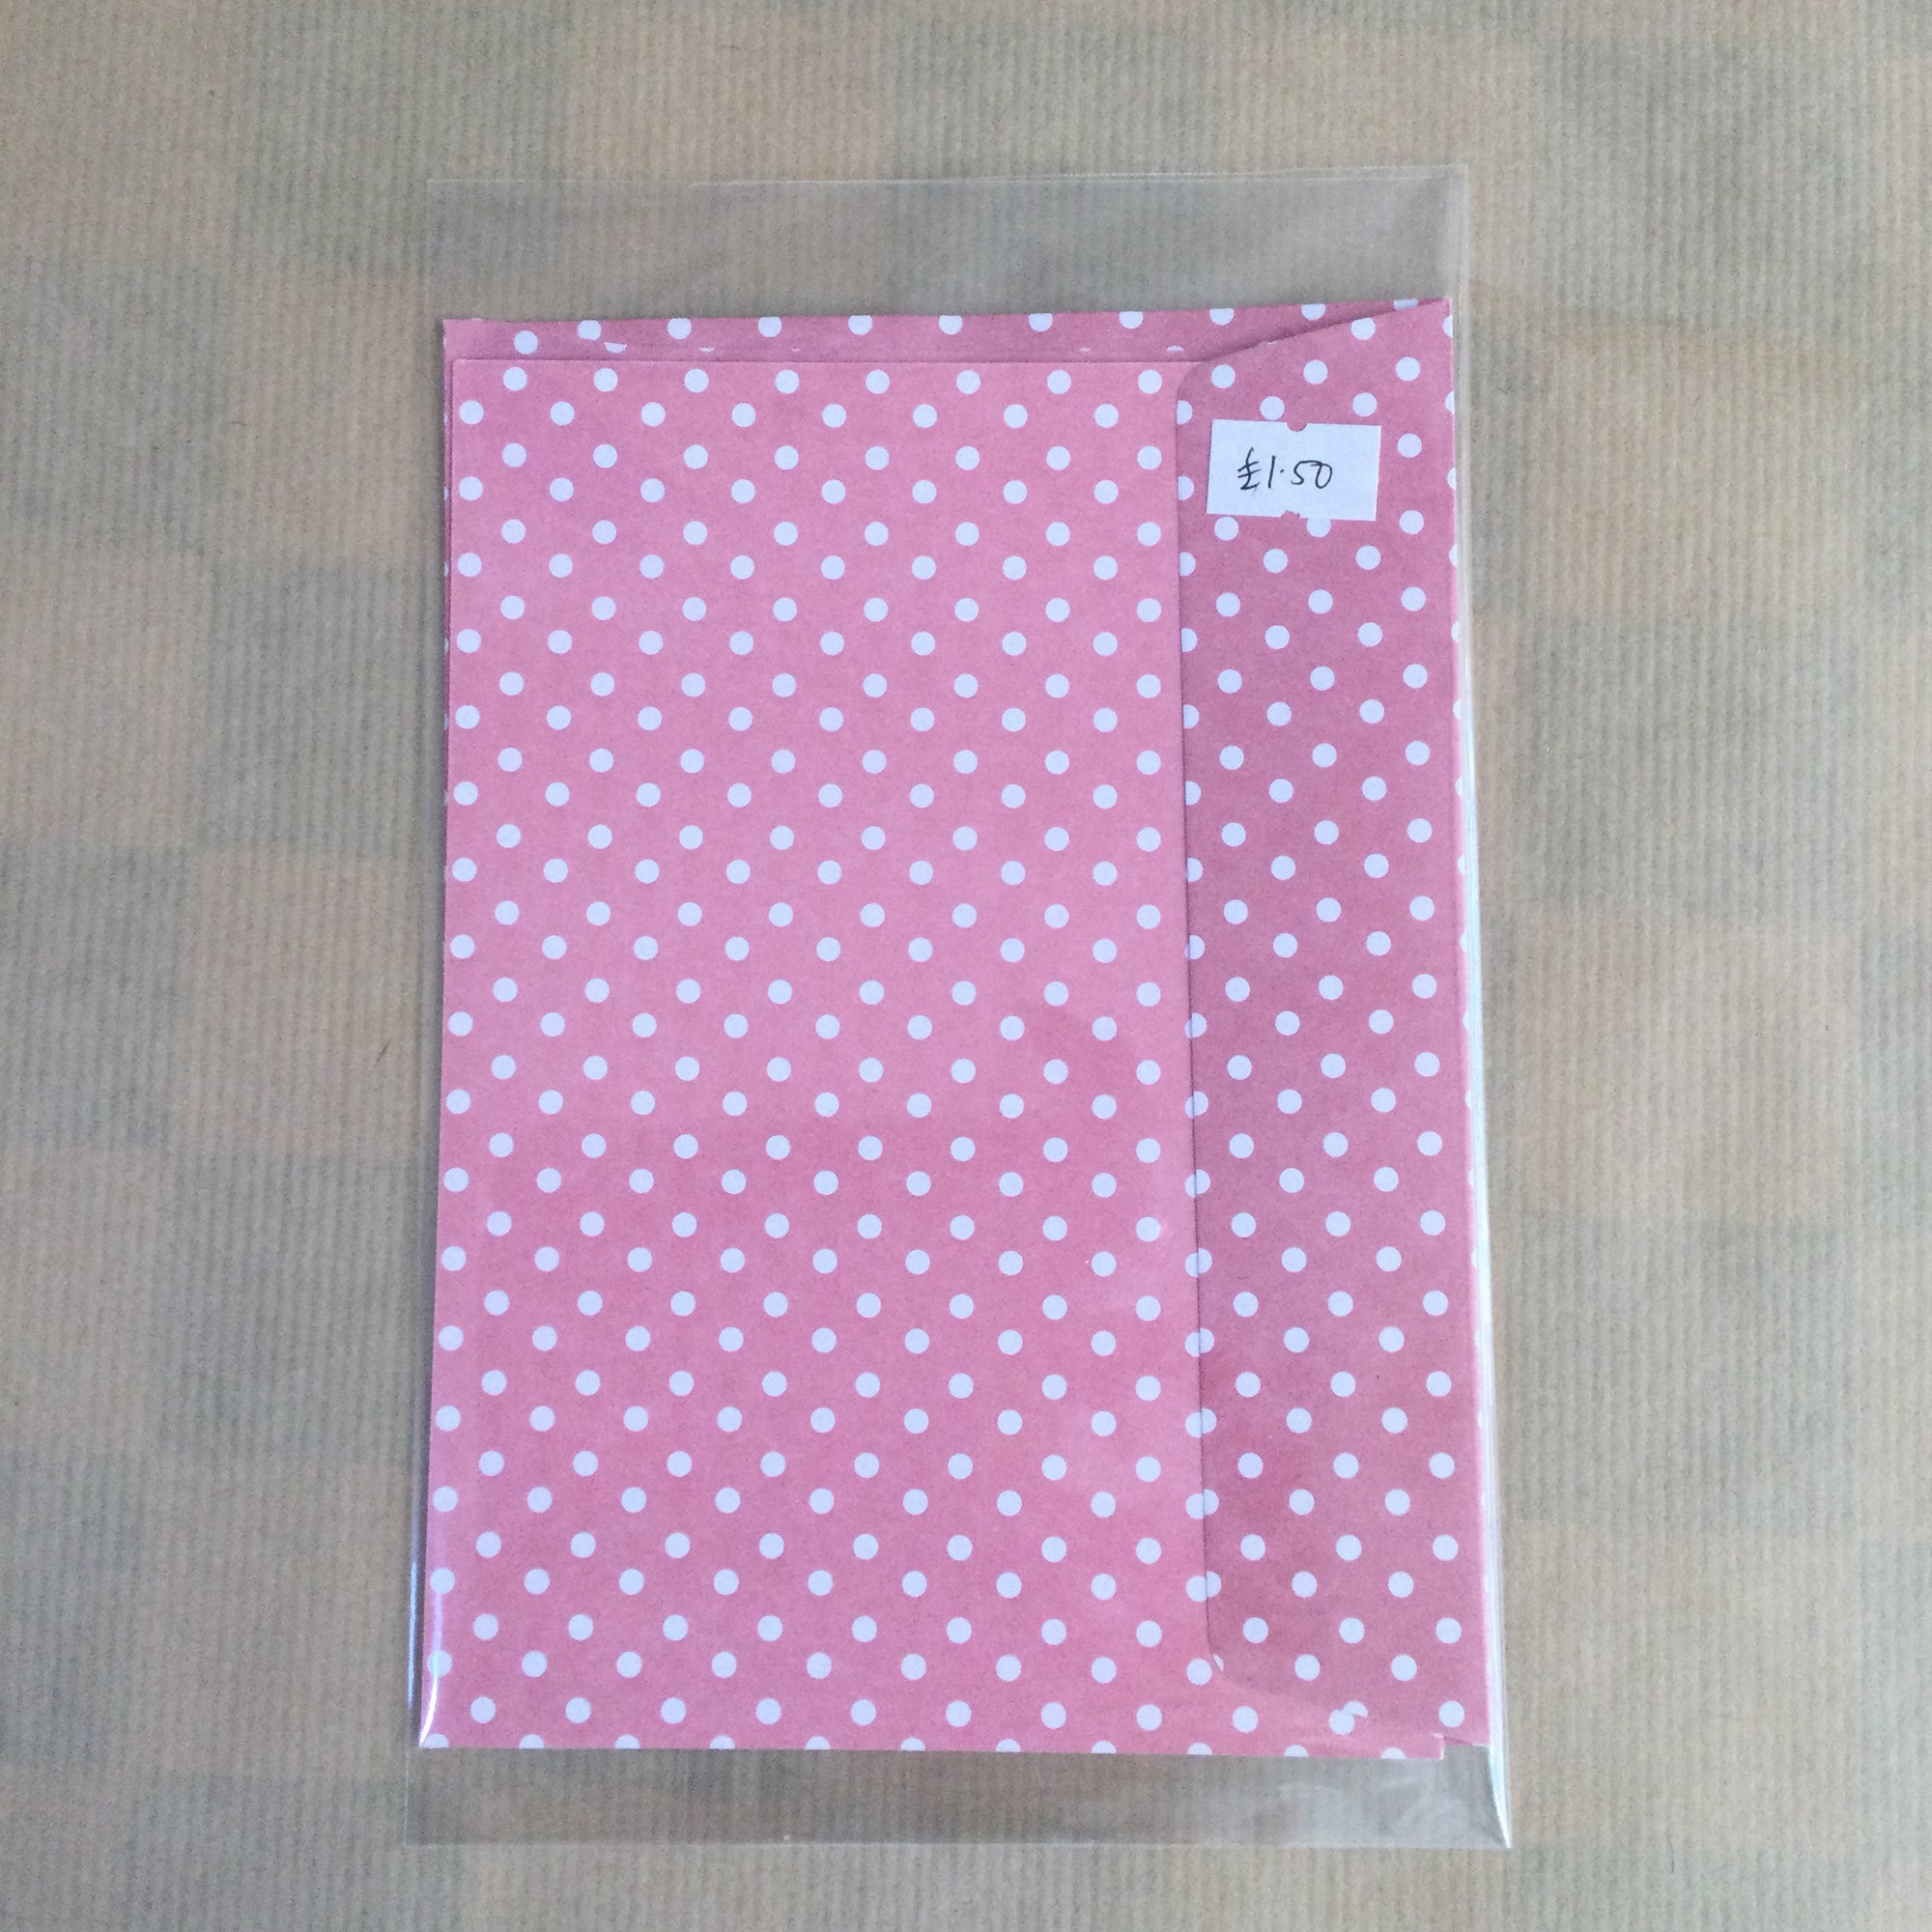 Single Spotted Card with Envelope